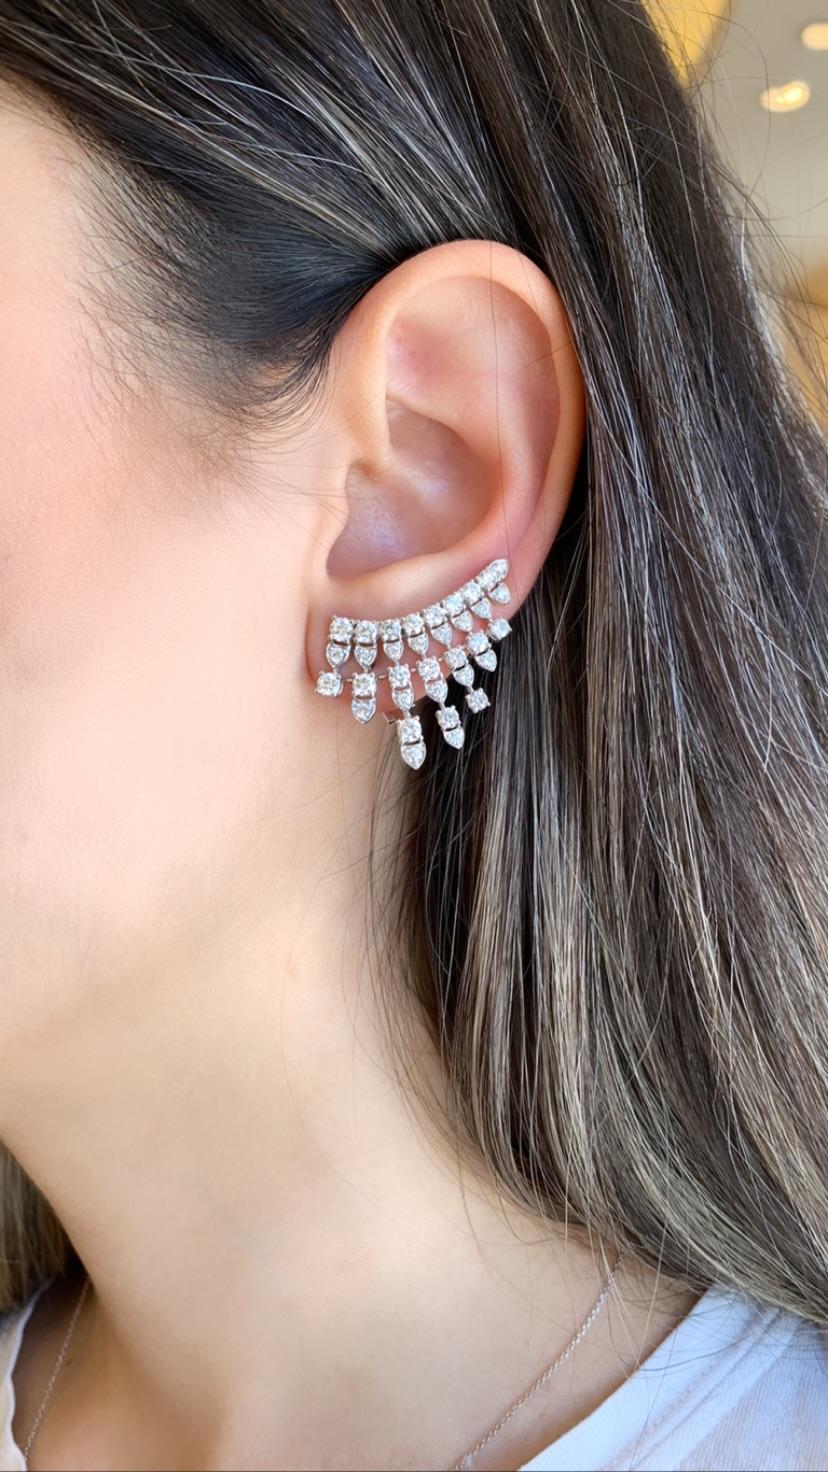 Limited Edition Diamond Earrings from Monan's 'Snow White' collection created by using 3.52 carat round brilliant cut diamonds on 18-karat white gold.  